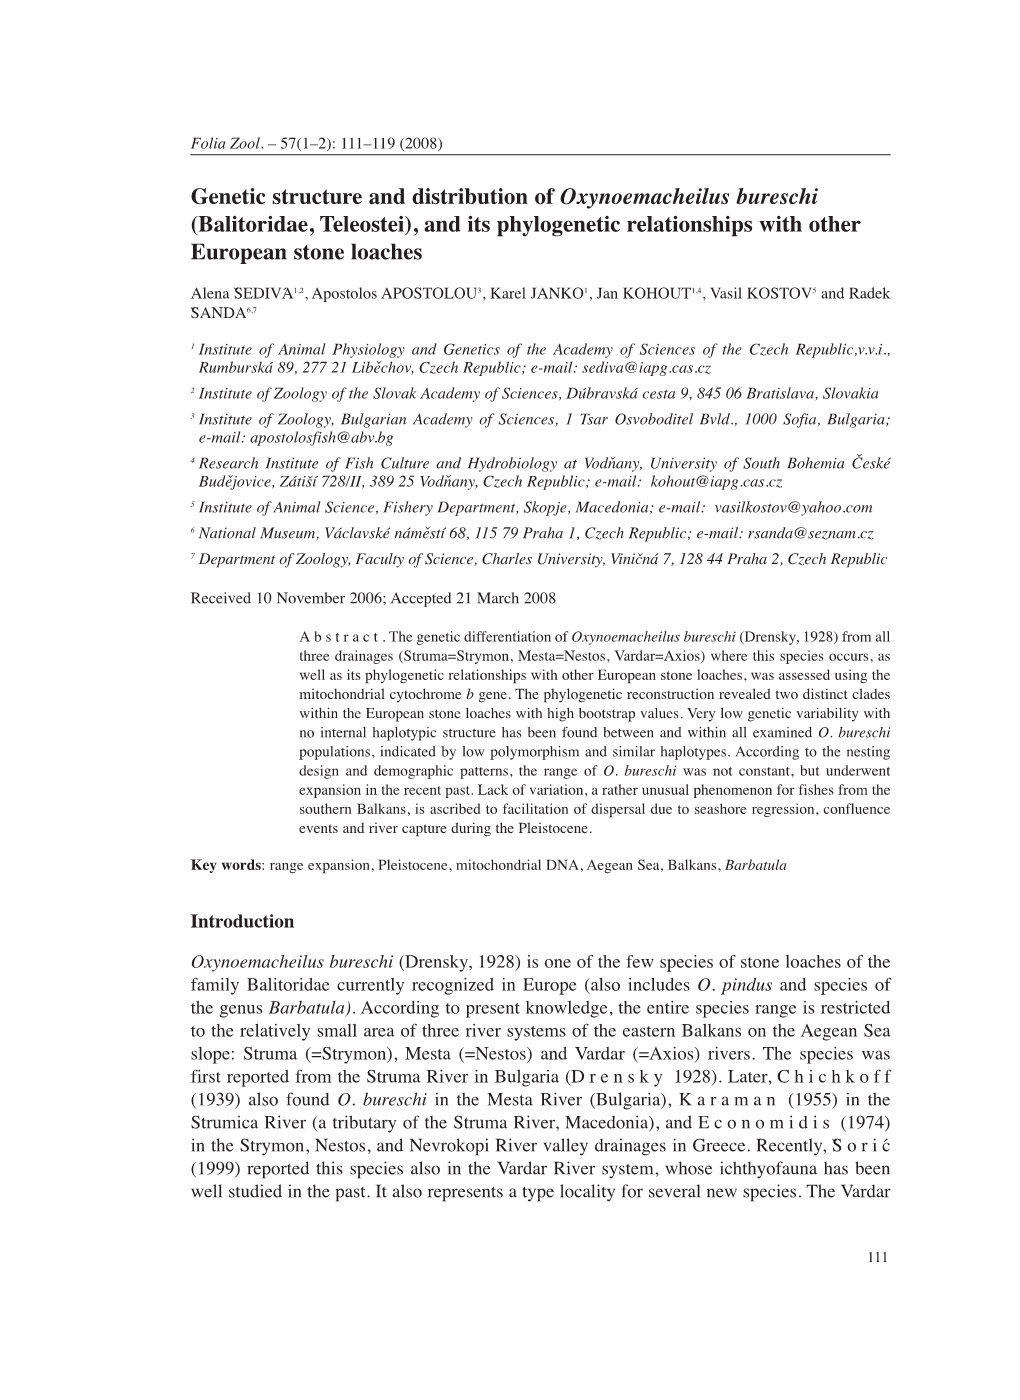 Genetic Structure and Distribution of Oxynoemacheilus Bureschi (Balitoridae, Teleostei), and Its Phylogenetic Relationships with Other European Stone Loaches